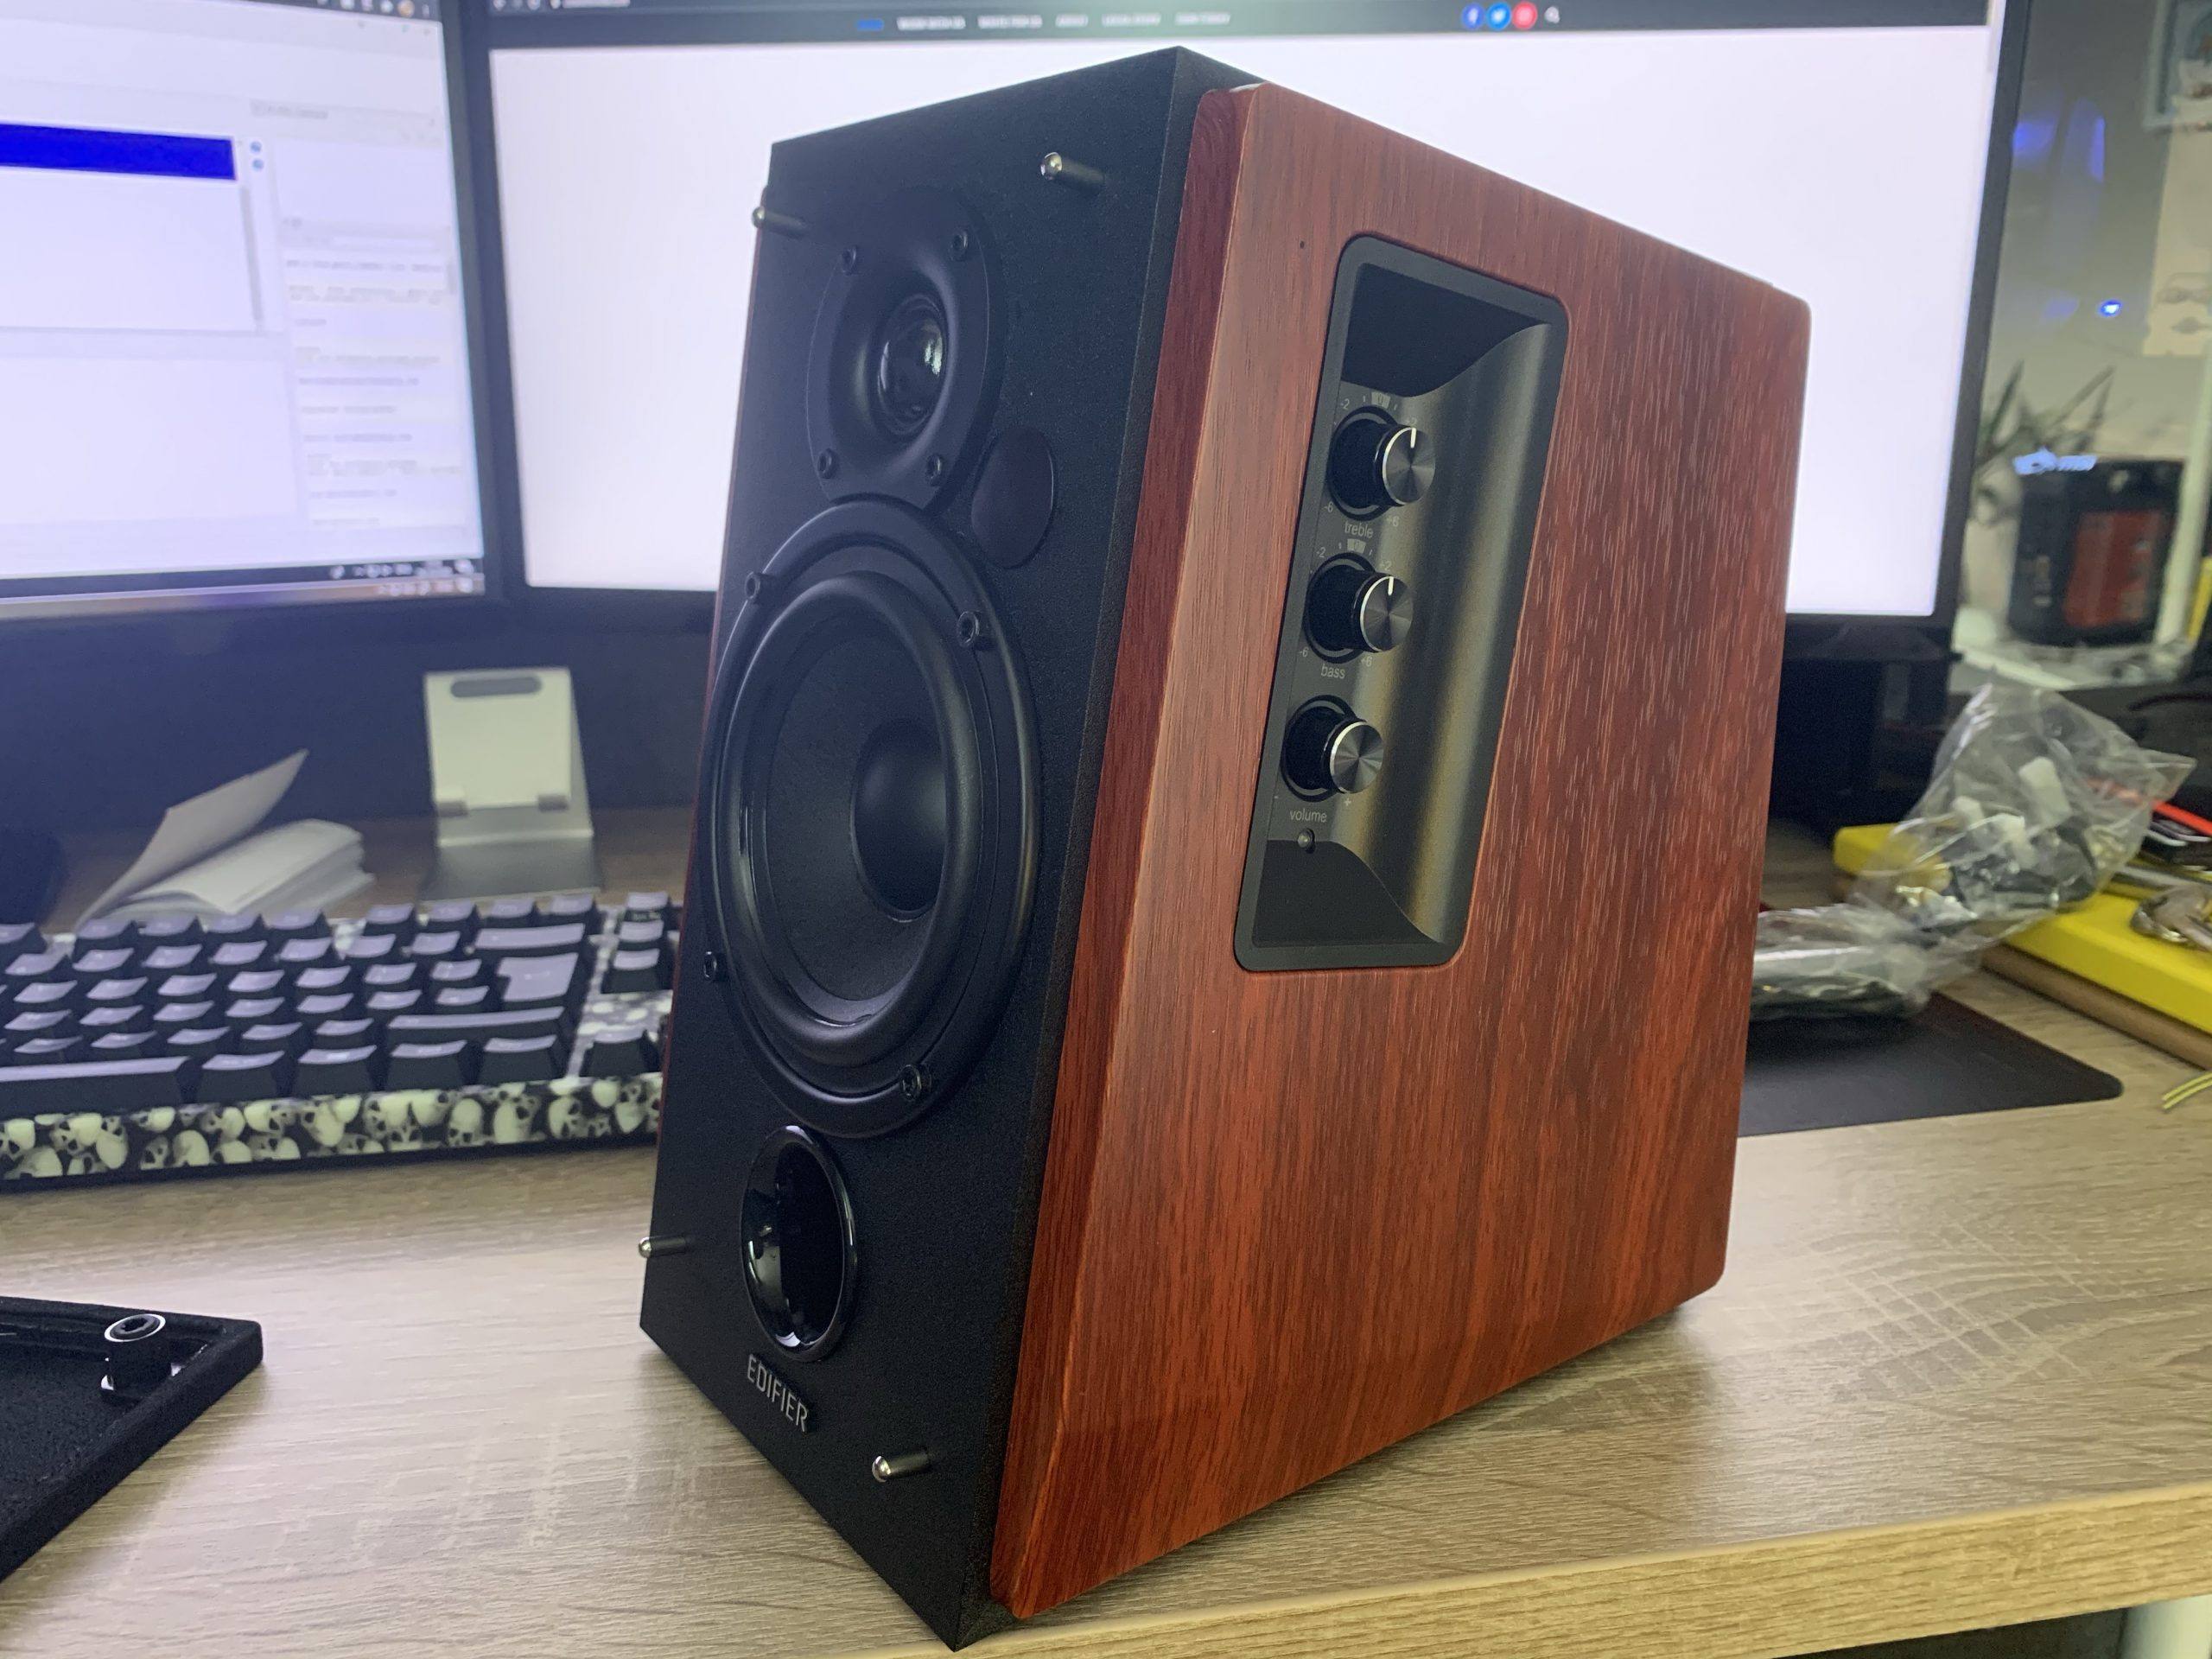 Edifier R1700BT Review - The bookshelf speakers hit the high notes